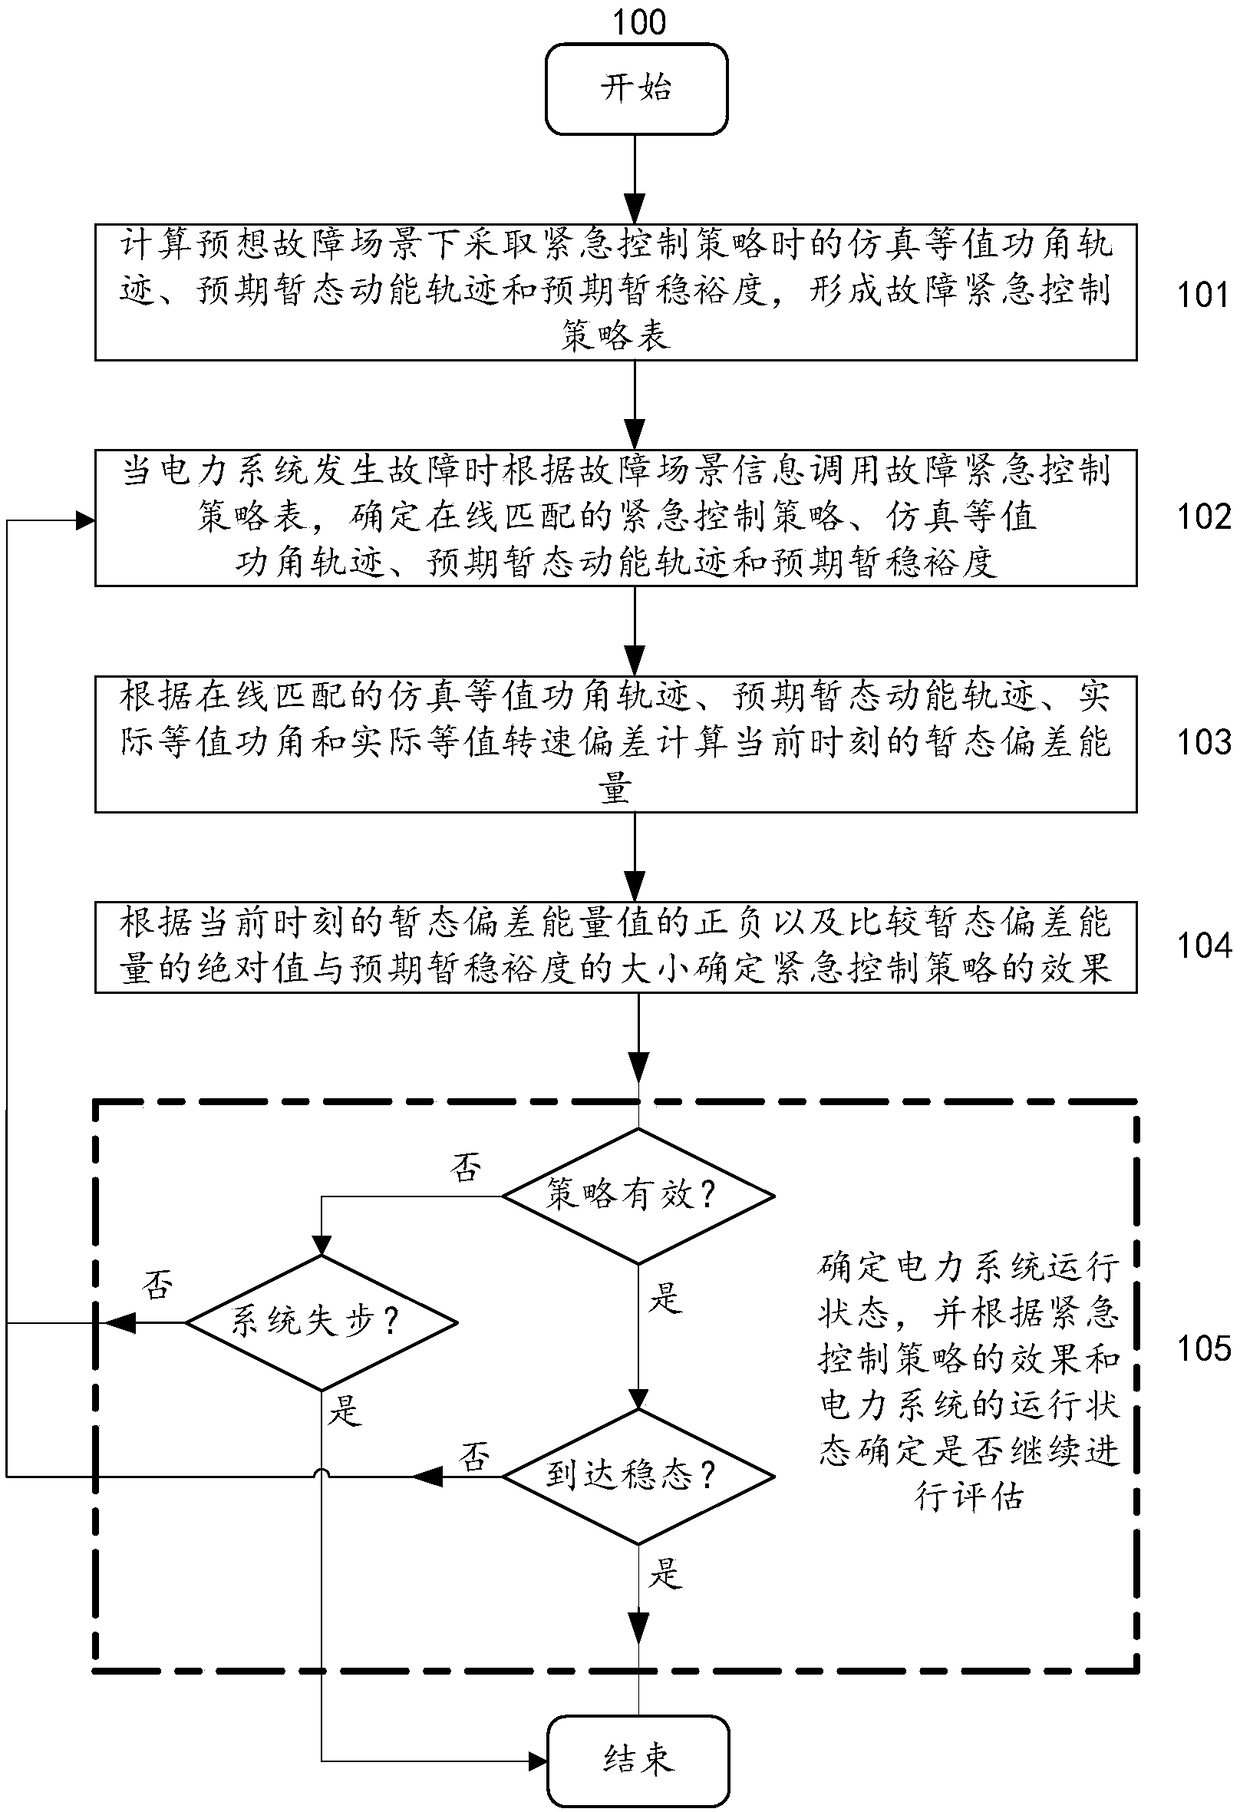 Method and system for evaluating effect of power system emergency control strategy